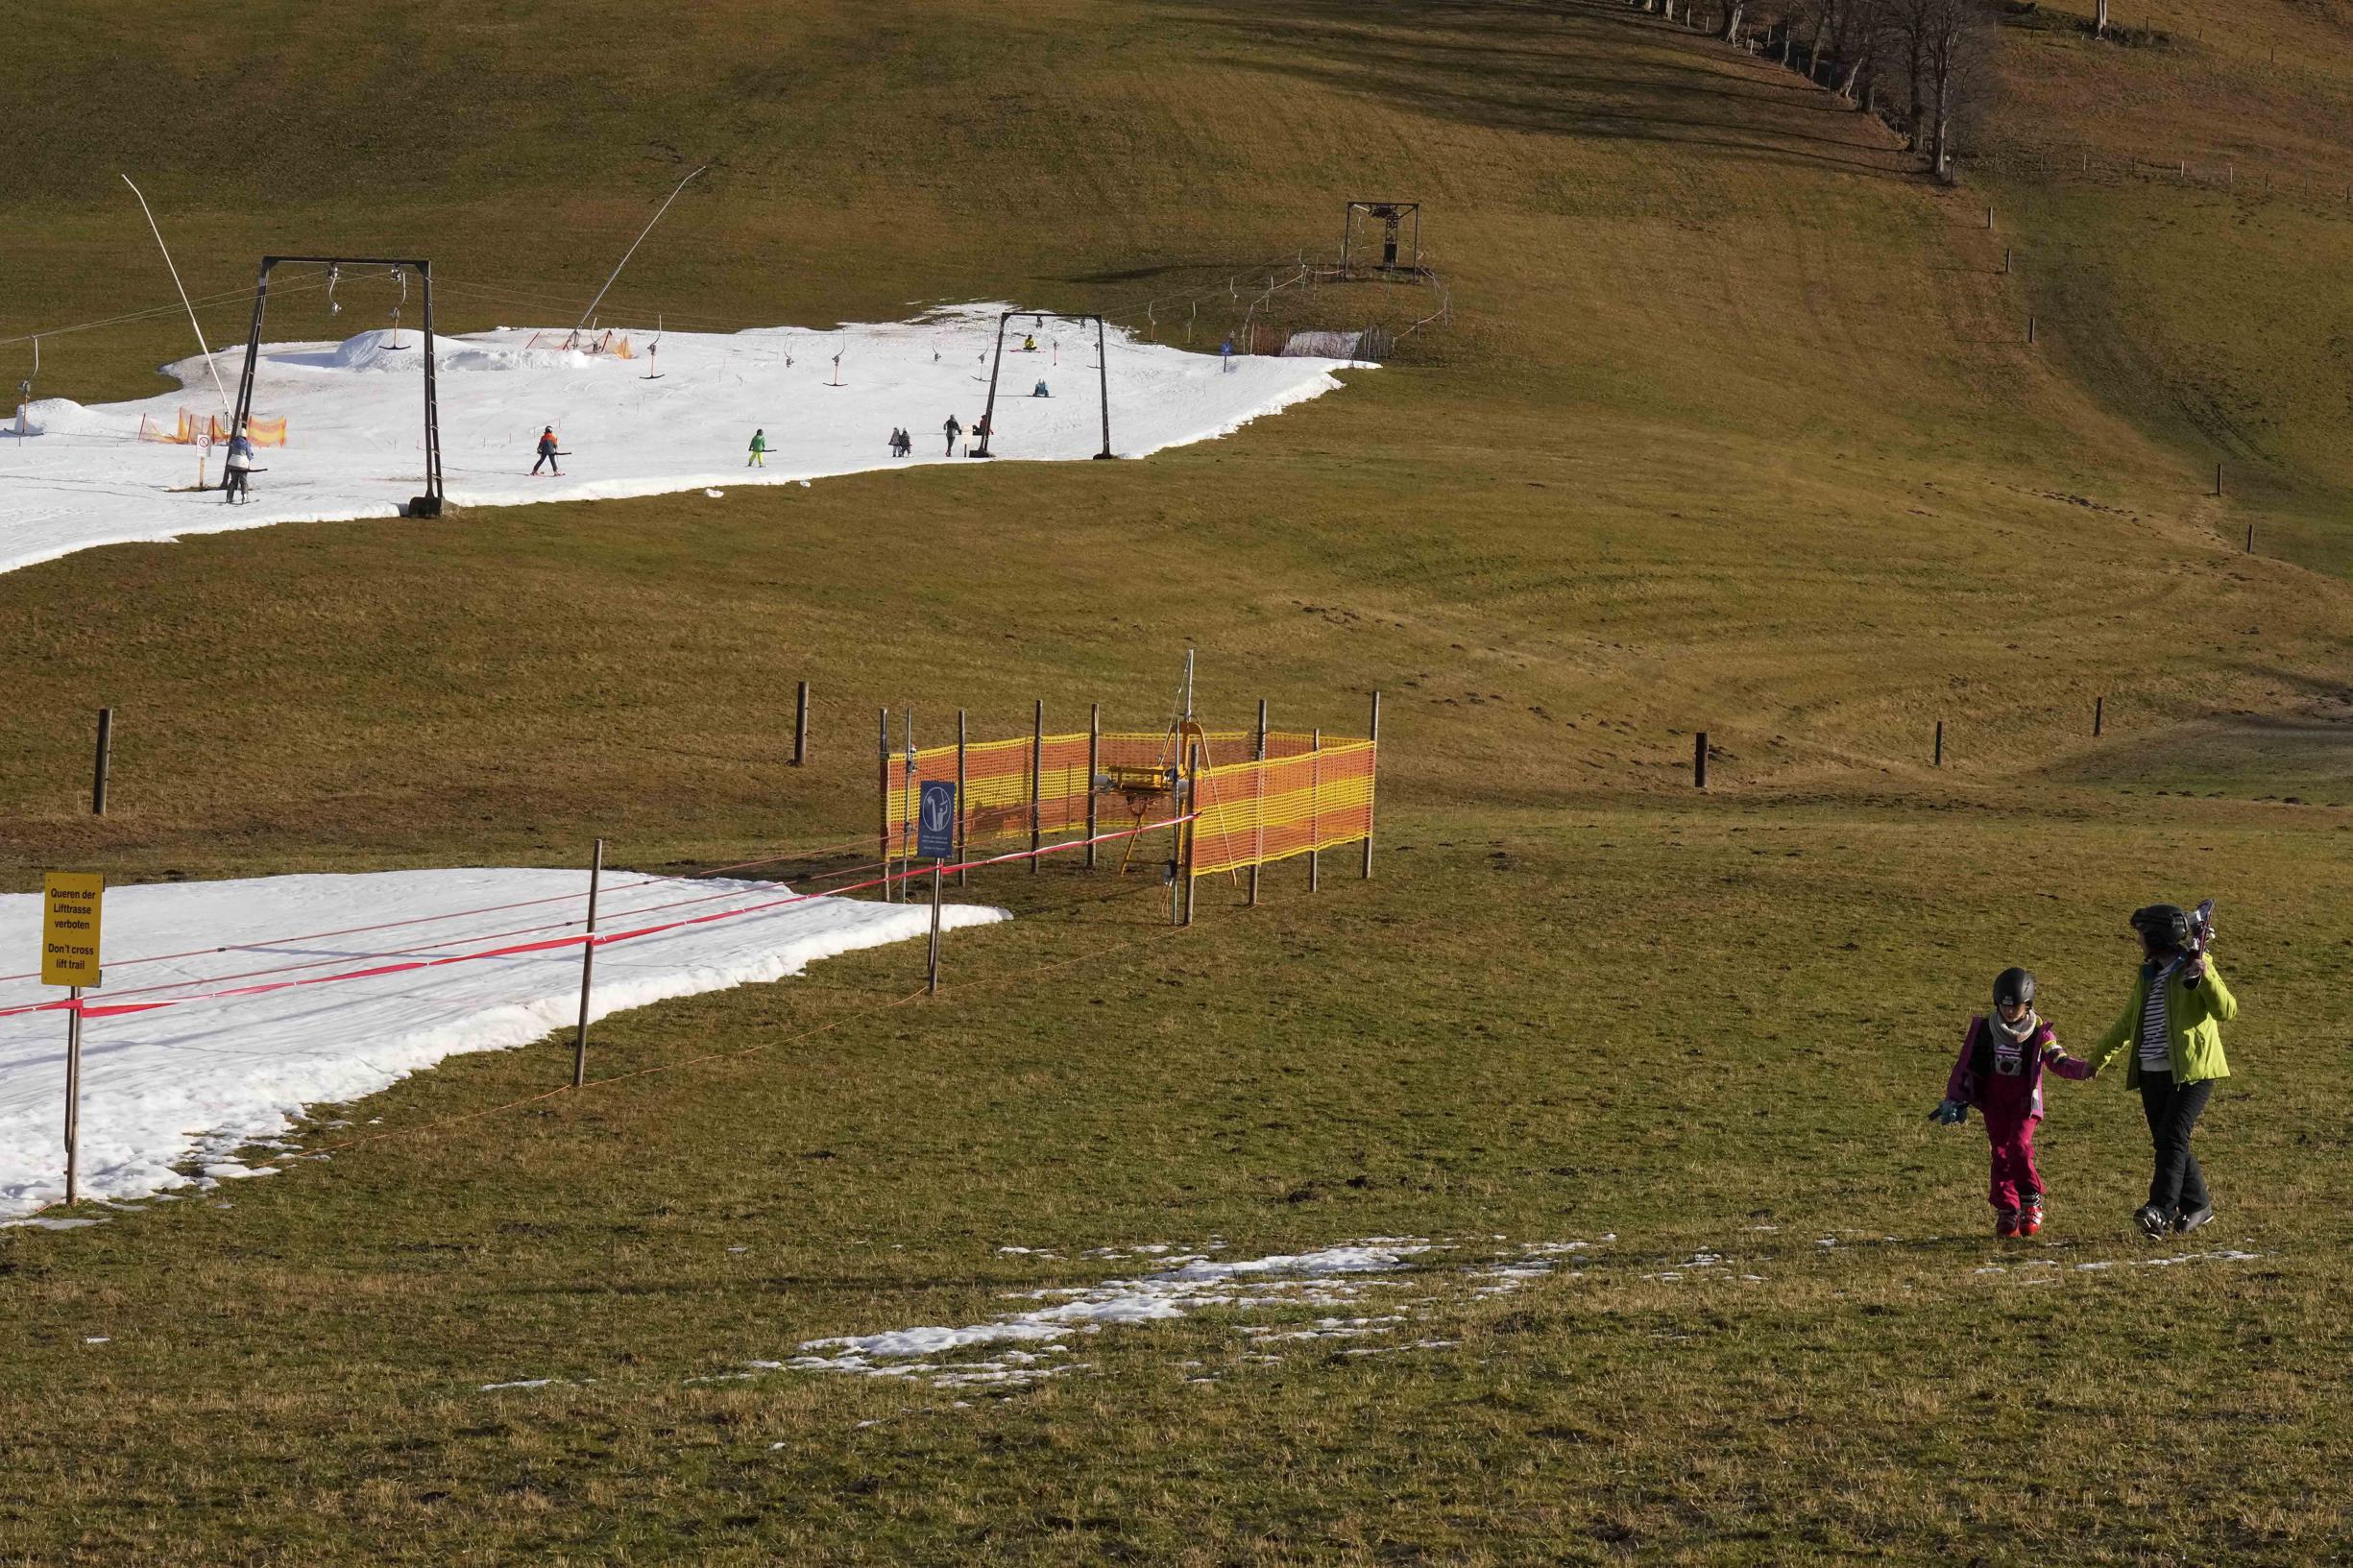 Ski resorts suffer from a lack of snow